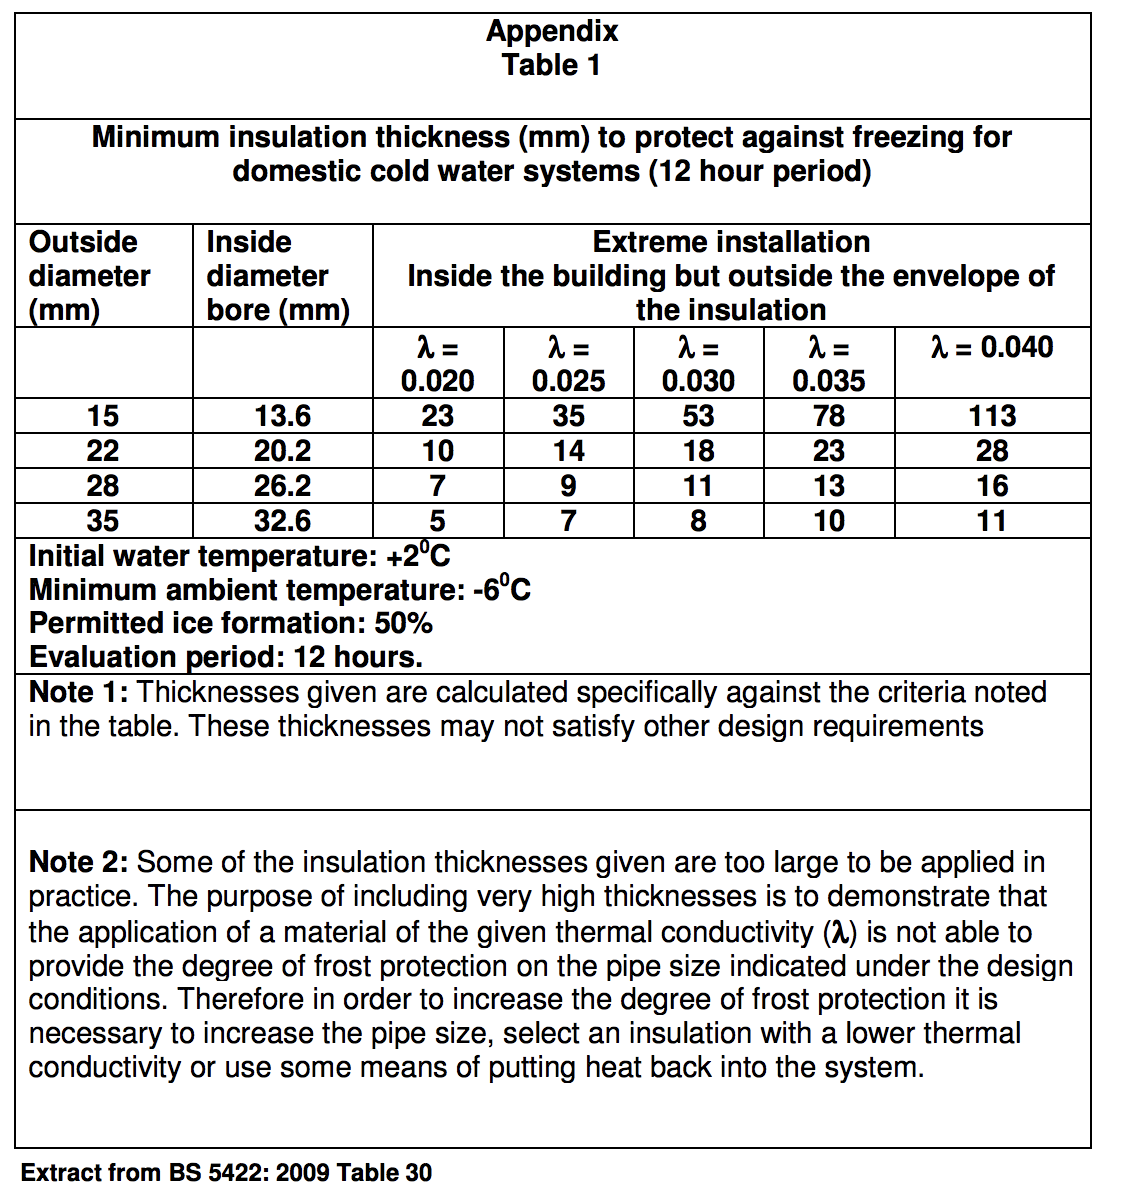 Table HG1 - Minimum insulation thickness (mm) to protect against freezing for domestic cold water systems (12 hour period) - Extract from TGD G